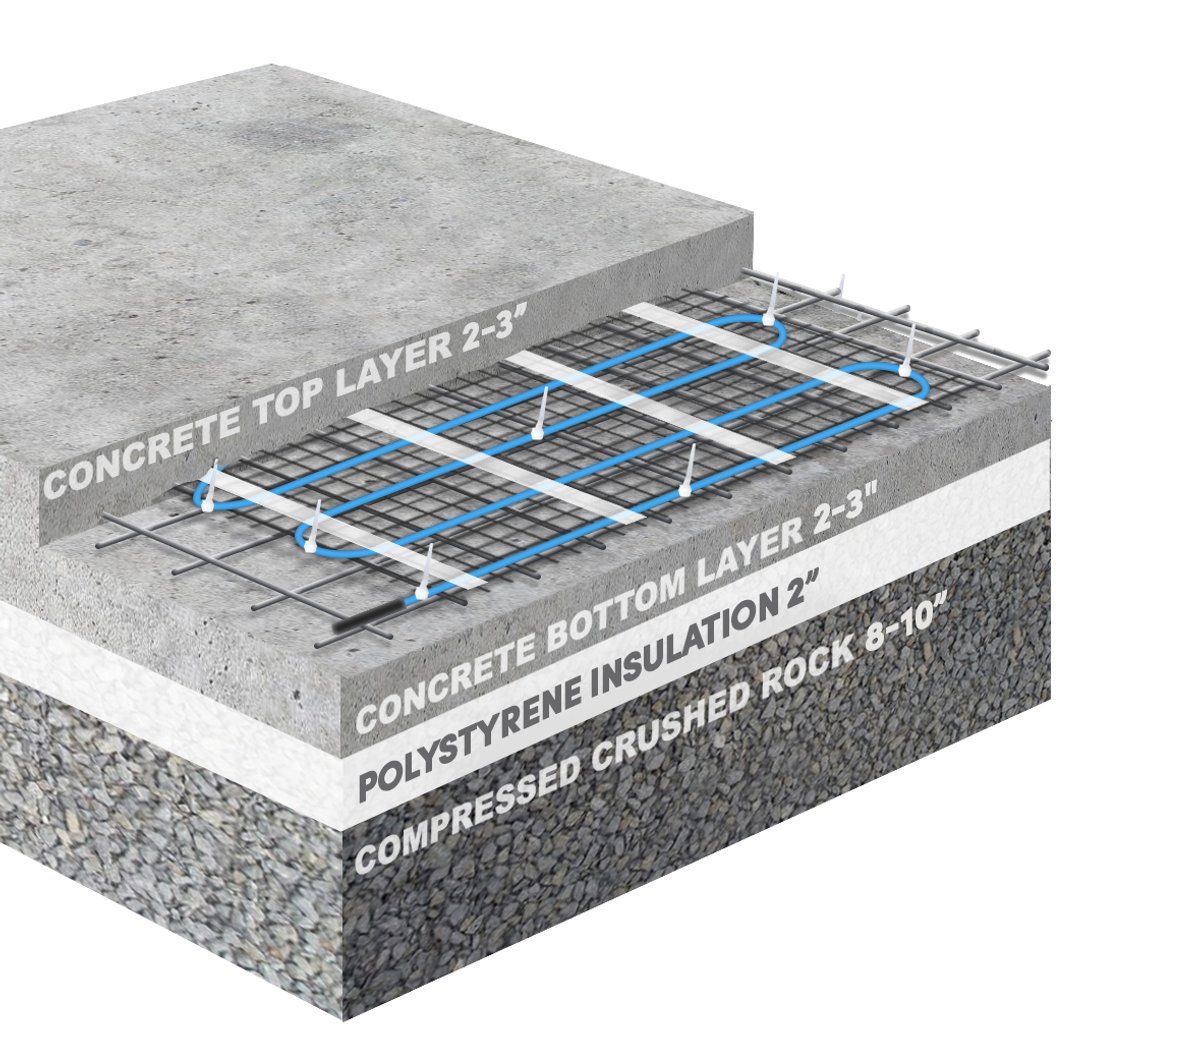 https://ik.warmlyyours.com/img/slab-heating-mats-for-floor-heating-cross-section-with-dimensions-749002.jpeg?tr=w-1200